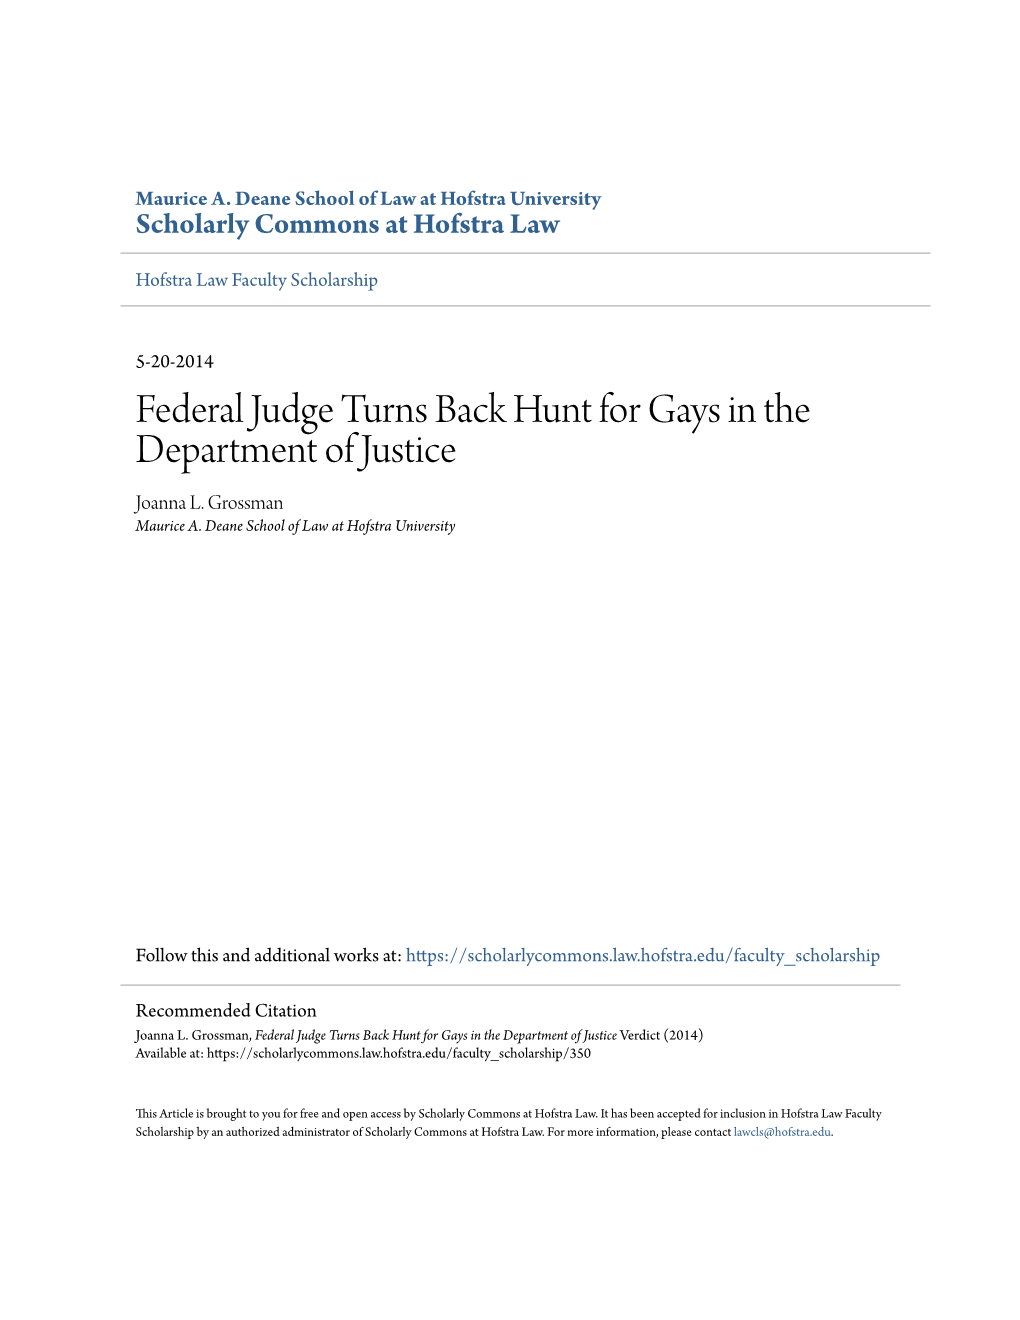 Federal Judge Turns Back Hunt for Gays in the Department of Justice Joanna L